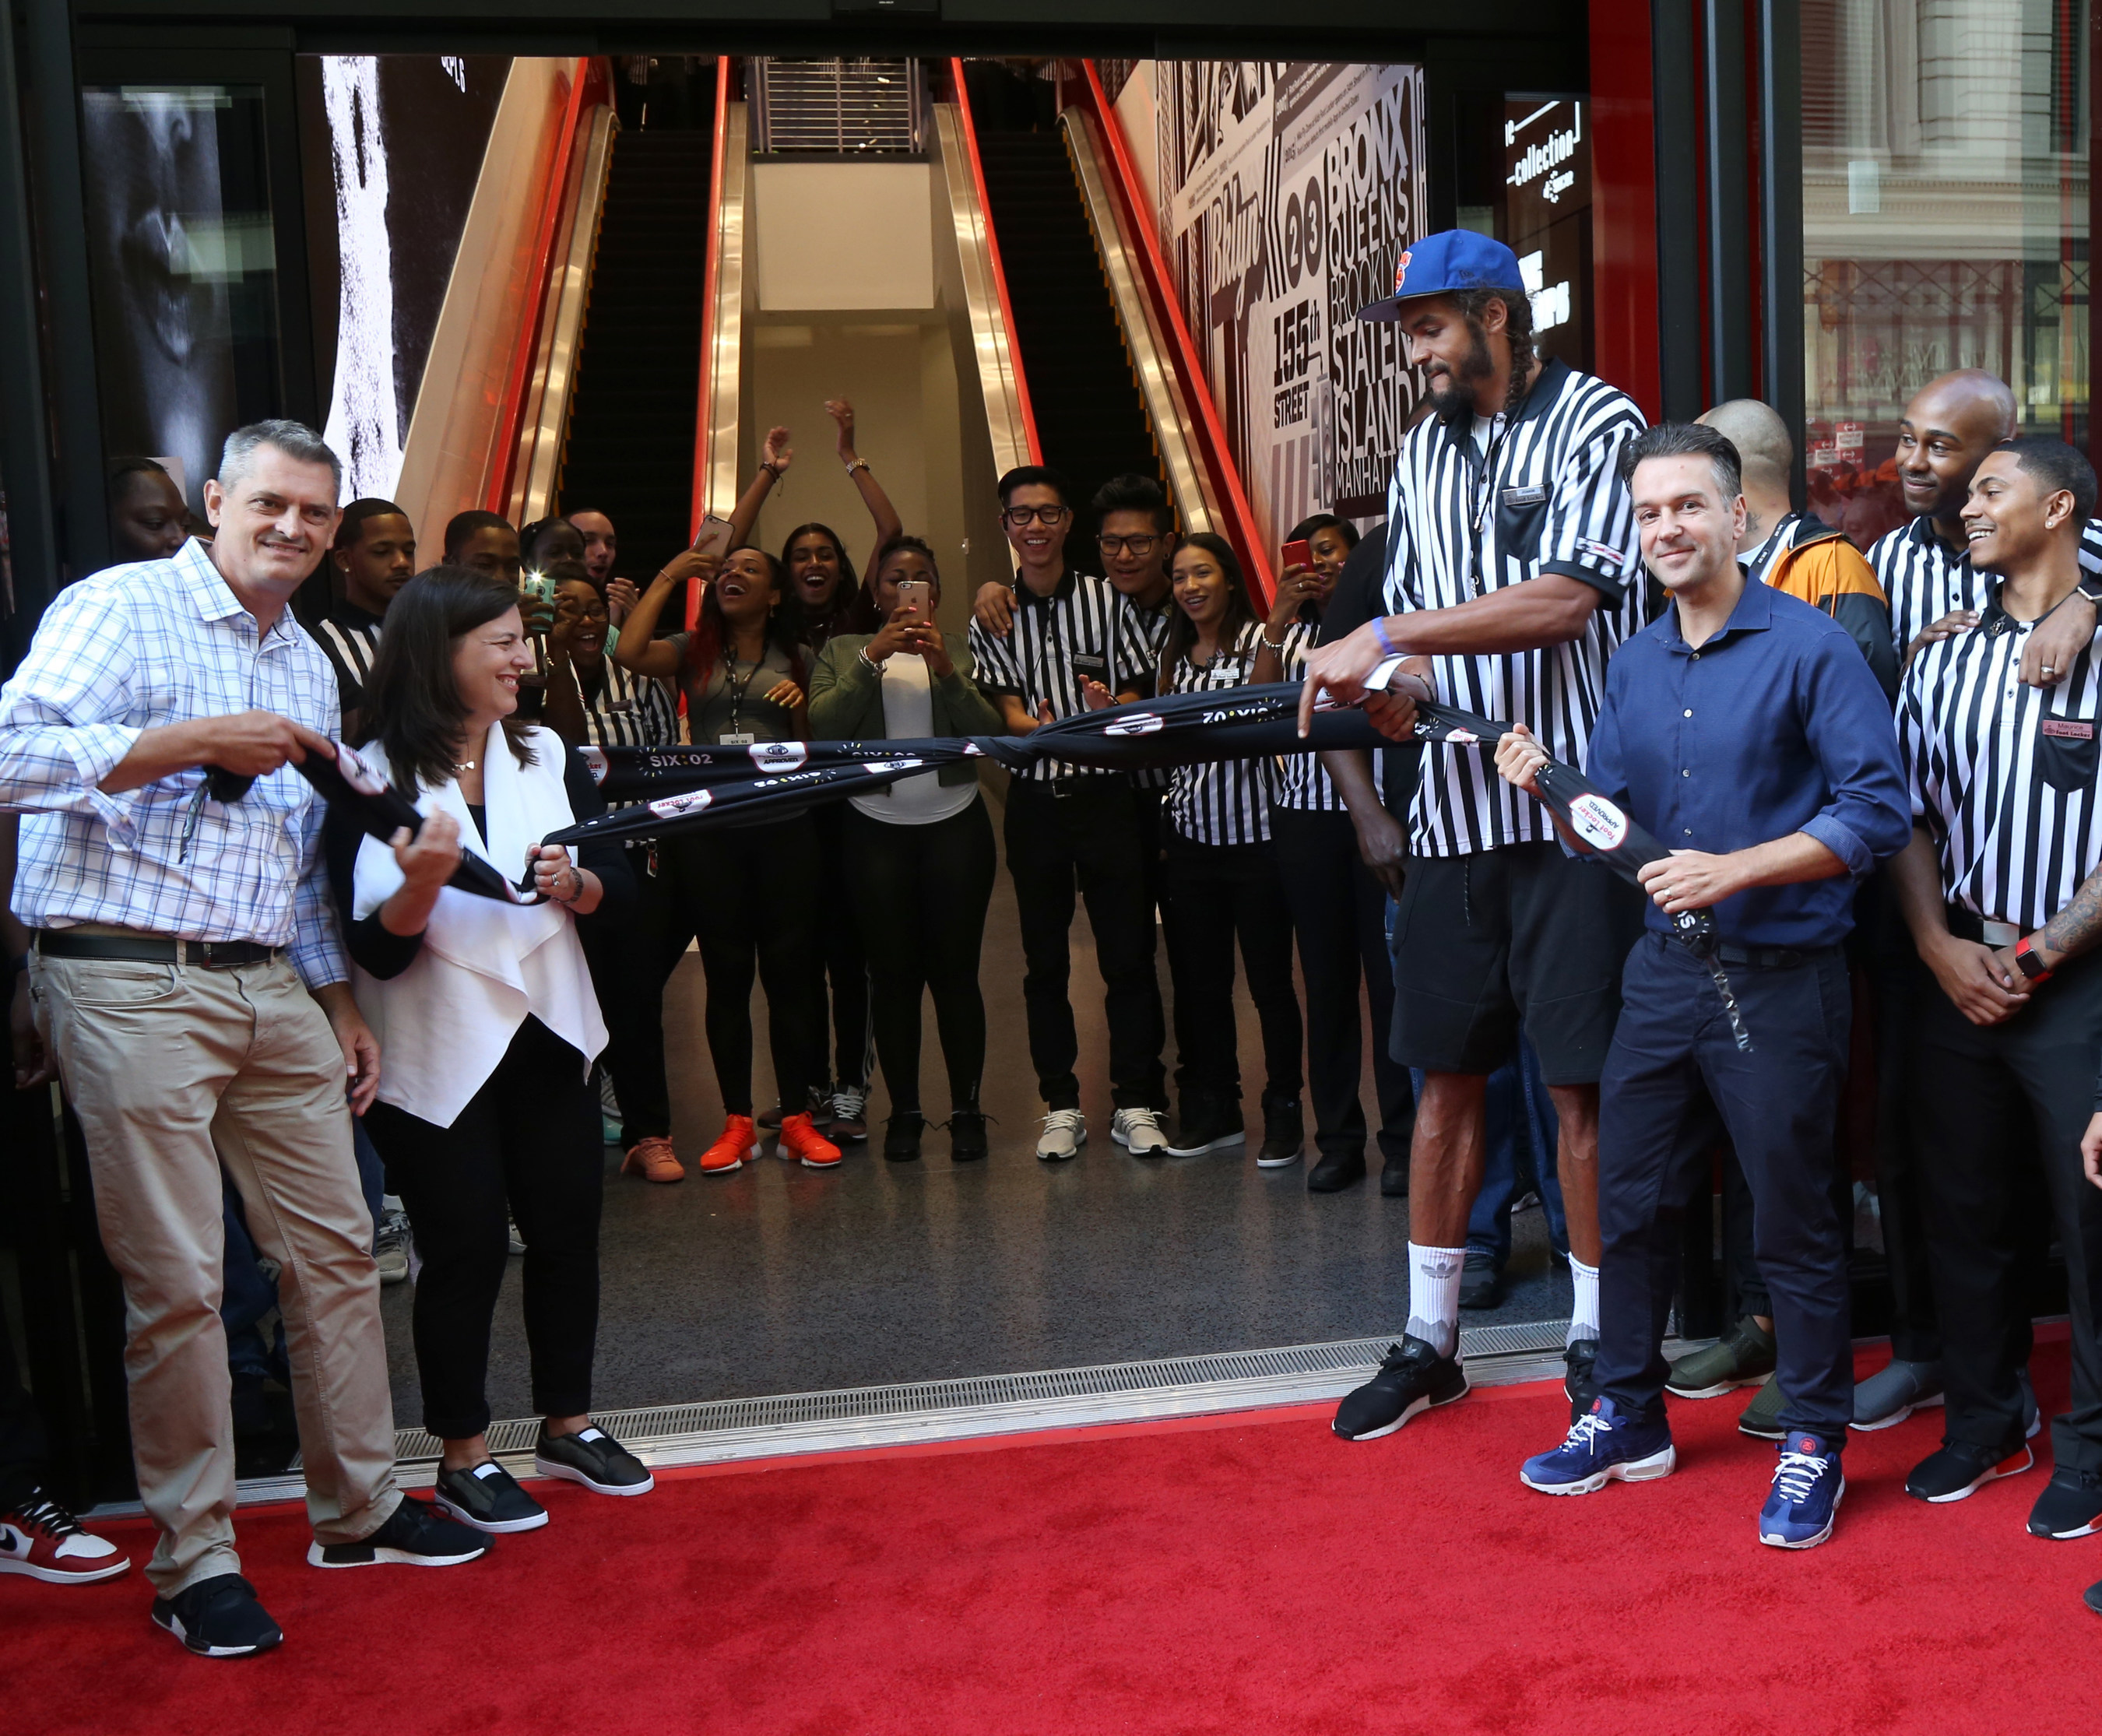 Working At Foot Locker: Company Overview and Culture - Zippia